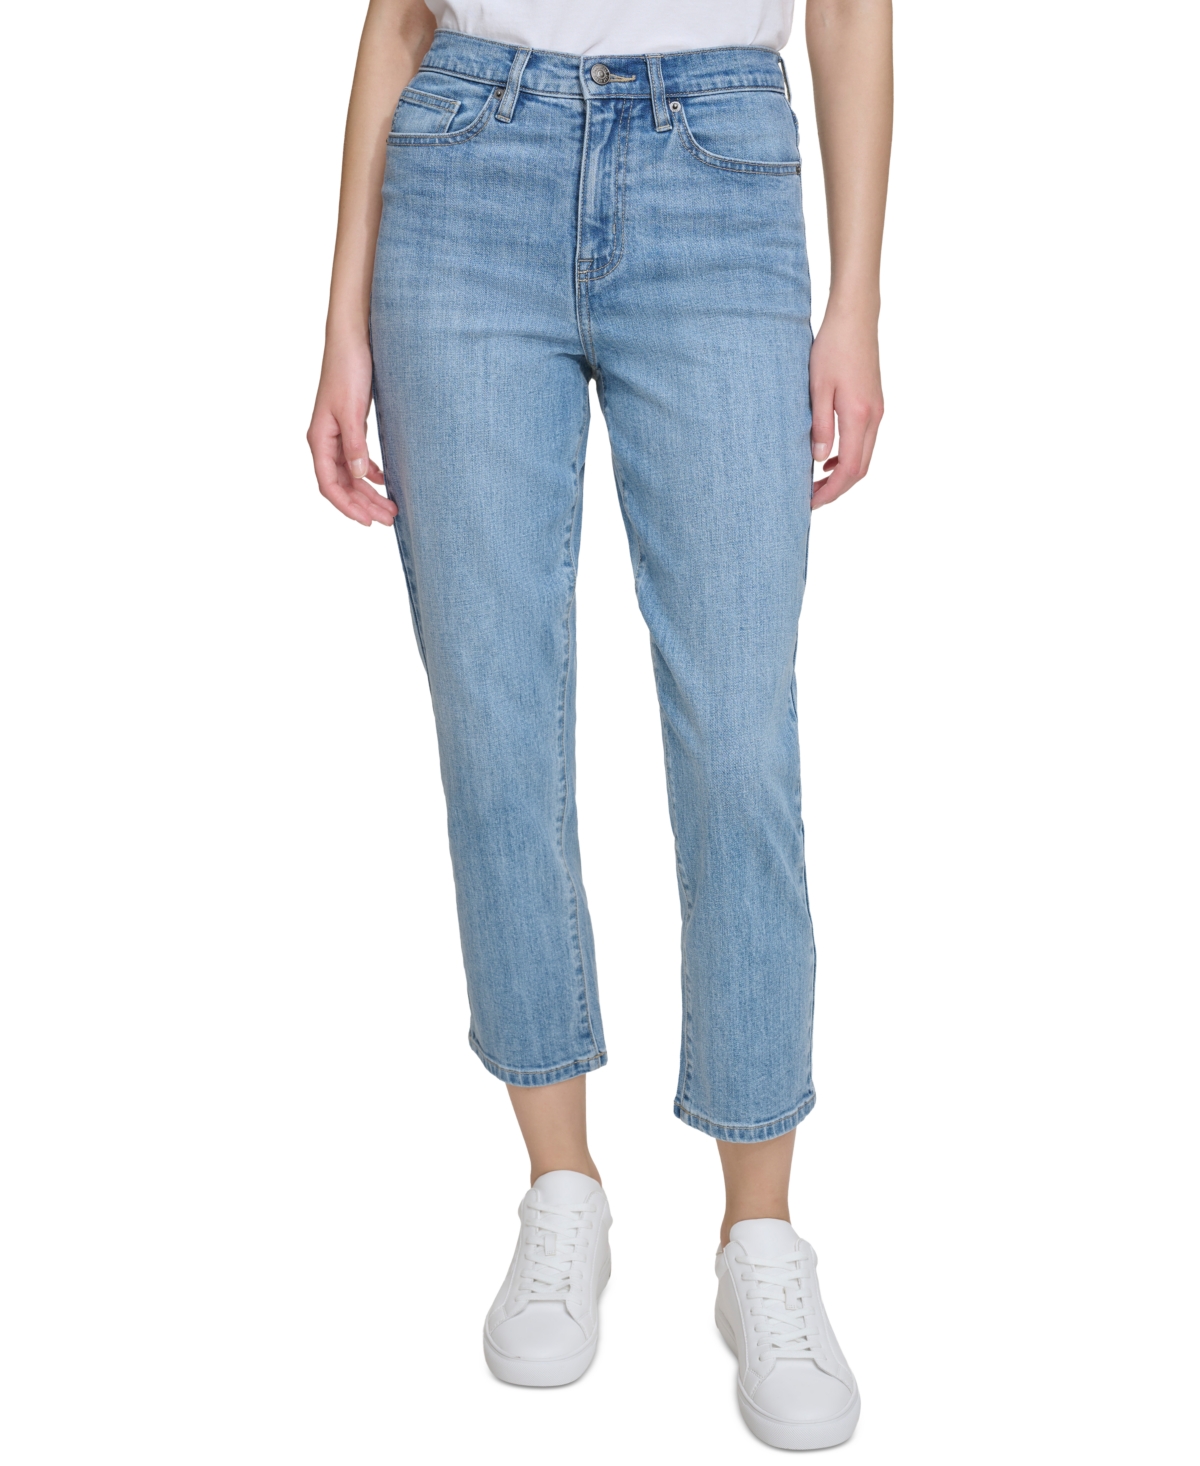 Dkny Jeans Women's High-rise Slim Straight Jeans In Fl - Bryant Wash